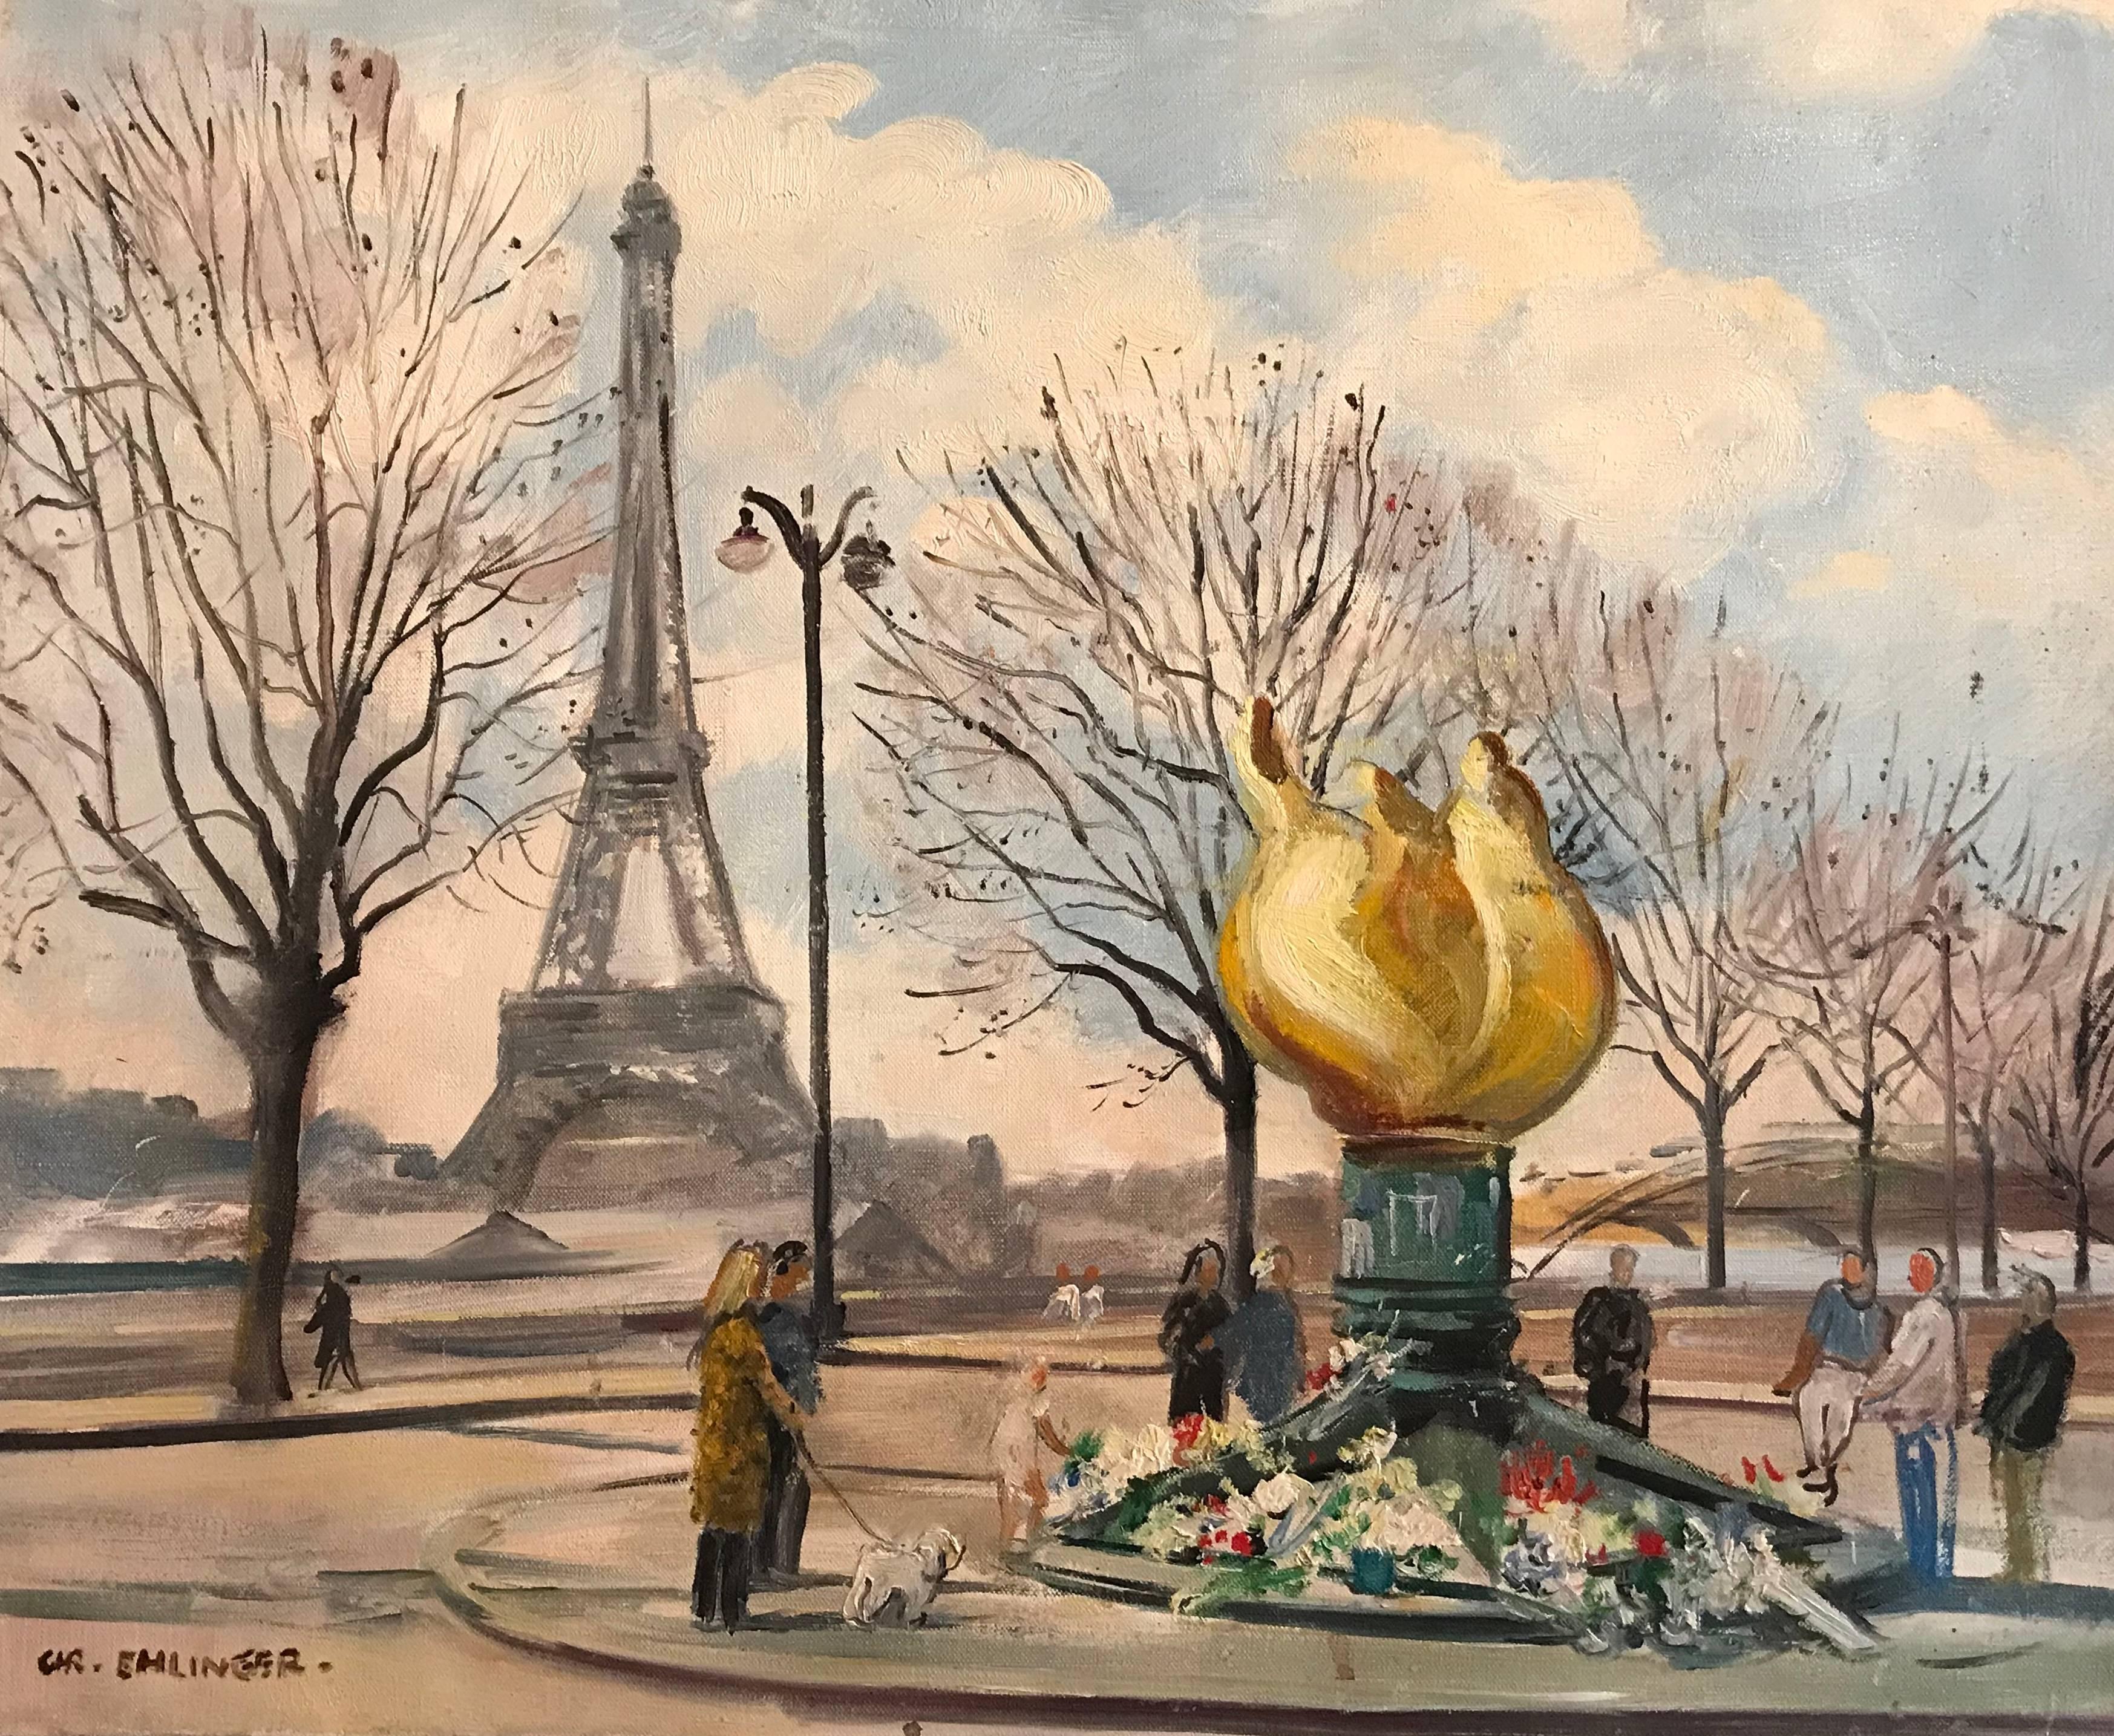 Christian Ehlinger Landscape Painting - Flame of Liberty, Paris - Princess Diana's Memorial, signed oil painting